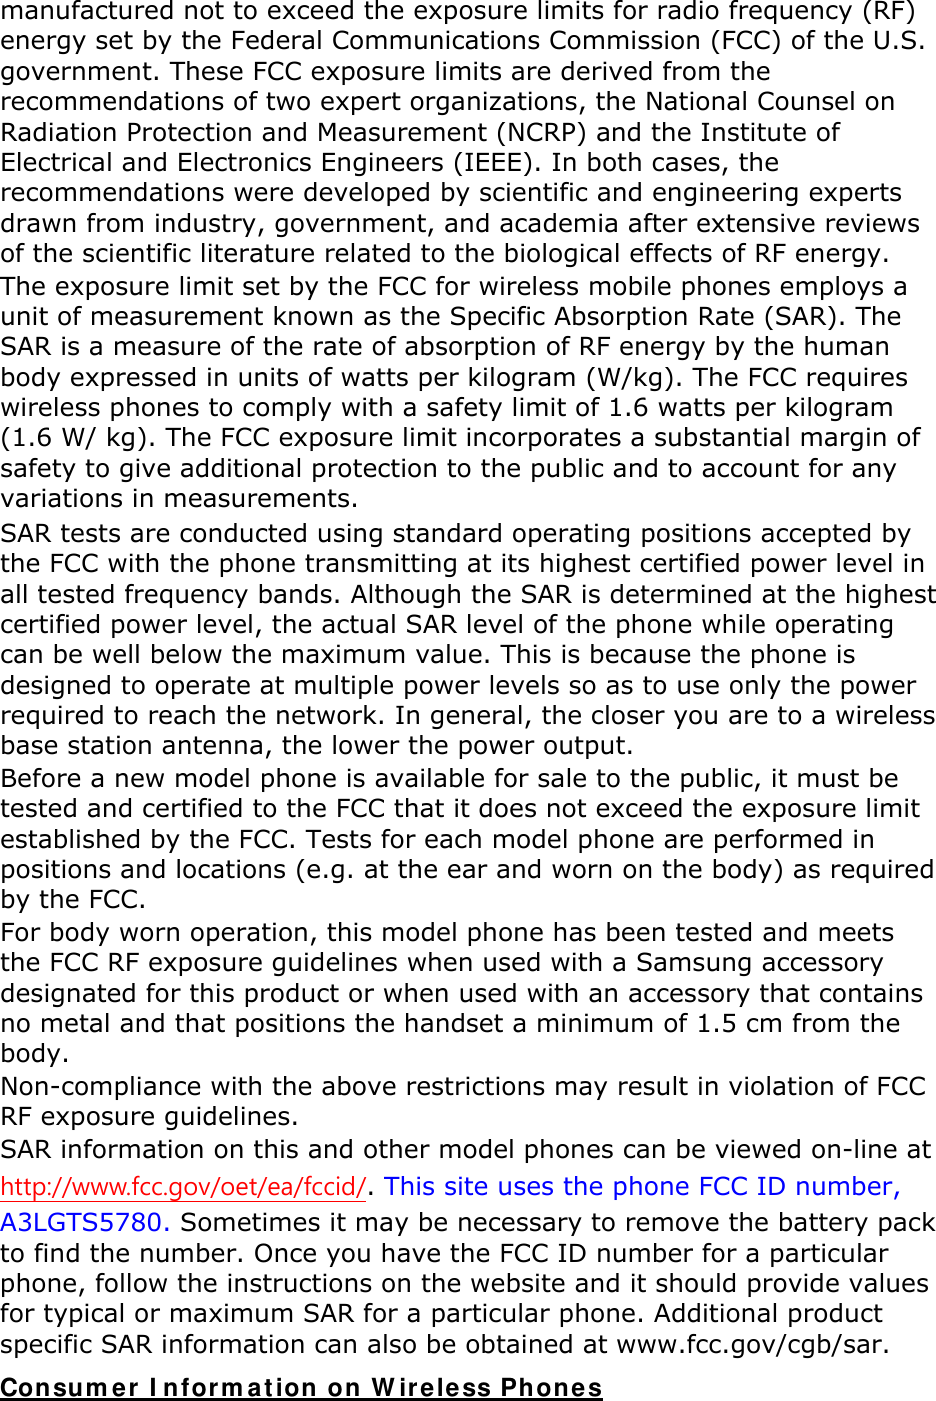 manufactured not to exceed the exposure limits for radio frequency (RF) energy set by the Federal Communications Commission (FCC) of the U.S. government. These FCC exposure limits are derived from the recommendations of two expert organizations, the National Counsel on Radiation Protection and Measurement (NCRP) and the Institute of Electrical and Electronics Engineers (IEEE). In both cases, the recommendations were developed by scientific and engineering experts drawn from industry, government, and academia after extensive reviews of the scientific literature related to the biological effects of RF energy. The exposure limit set by the FCC for wireless mobile phones employs a unit of measurement known as the Specific Absorption Rate (SAR). The SAR is a measure of the rate of absorption of RF energy by the human body expressed in units of watts per kilogram (W/kg). The FCC requires wireless phones to comply with a safety limit of 1.6 watts per kilogram (1.6 W/ kg). The FCC exposure limit incorporates a substantial margin of safety to give additional protection to the public and to account for any variations in measurements. SAR tests are conducted using standard operating positions accepted by the FCC with the phone transmitting at its highest certified power level in all tested frequency bands. Although the SAR is determined at the highest certified power level, the actual SAR level of the phone while operating can be well below the maximum value. This is because the phone is designed to operate at multiple power levels so as to use only the power required to reach the network. In general, the closer you are to a wireless base station antenna, the lower the power output. Before a new model phone is available for sale to the public, it must be tested and certified to the FCC that it does not exceed the exposure limit established by the FCC. Tests for each model phone are performed in positions and locations (e.g. at the ear and worn on the body) as required by the FCC.     For body worn operation, this model phone has been tested and meets the FCC RF exposure guidelines when used with a Samsung accessory designated for this product or when used with an accessory that contains no metal and that positions the handset a minimum of 1.5 cm from the body.  Non-compliance with the above restrictions may result in violation of FCC RF exposure guidelines. SAR information on this and other model phones can be viewed on-line at http://www.fcc.gov/oet/ea/fccid/. This site uses the phone FCC ID number, A3LGTS5780. Sometimes it may be necessary to remove the battery pack to find the number. Once you have the FCC ID number for a particular phone, follow the instructions on the website and it should provide values for typical or maximum SAR for a particular phone. Additional product specific SAR information can also be obtained at www.fcc.gov/cgb/sar. Consumer Information on Wireless Phones 